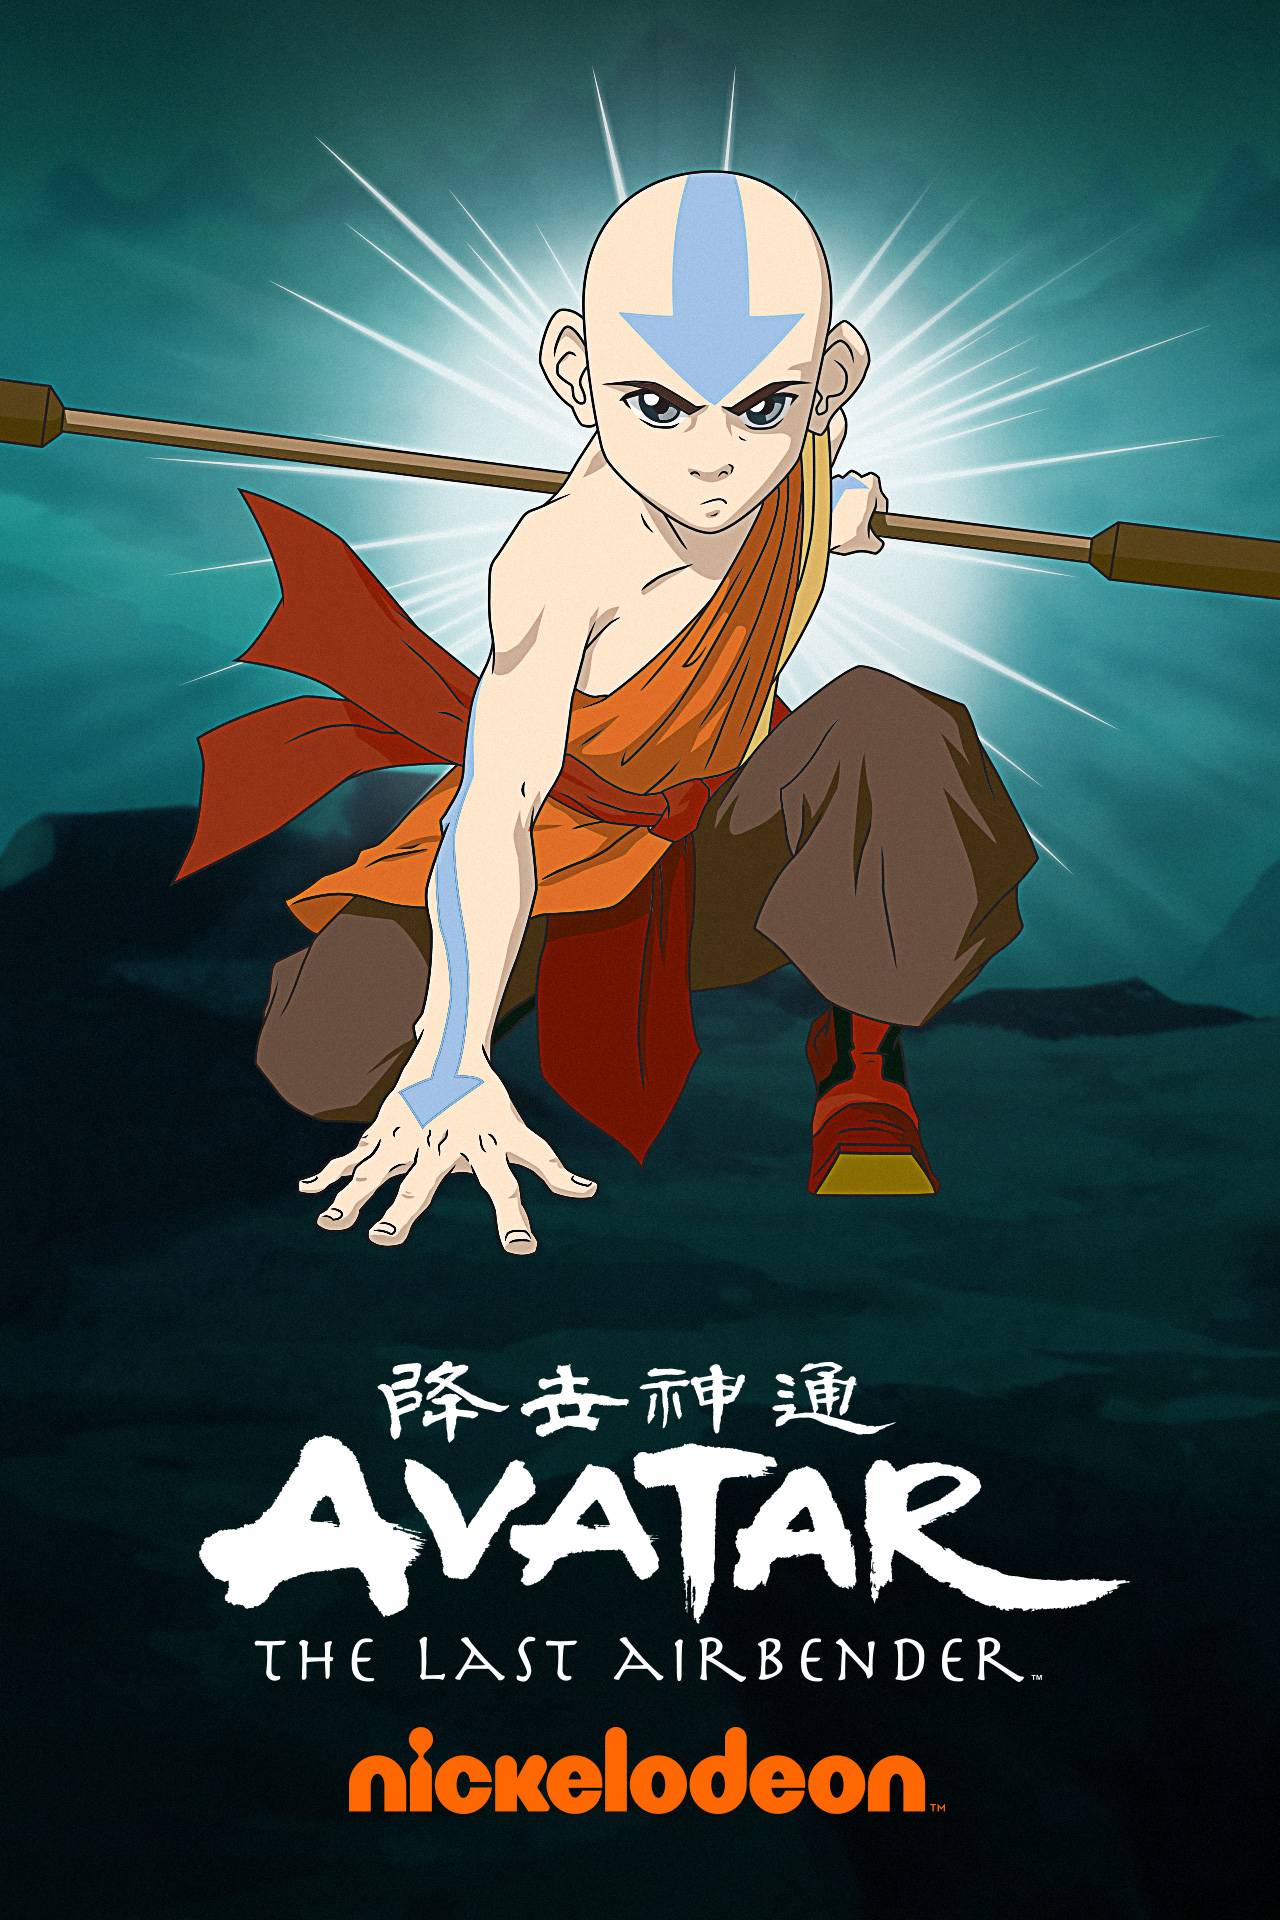 pictures from avatar: the last airbender